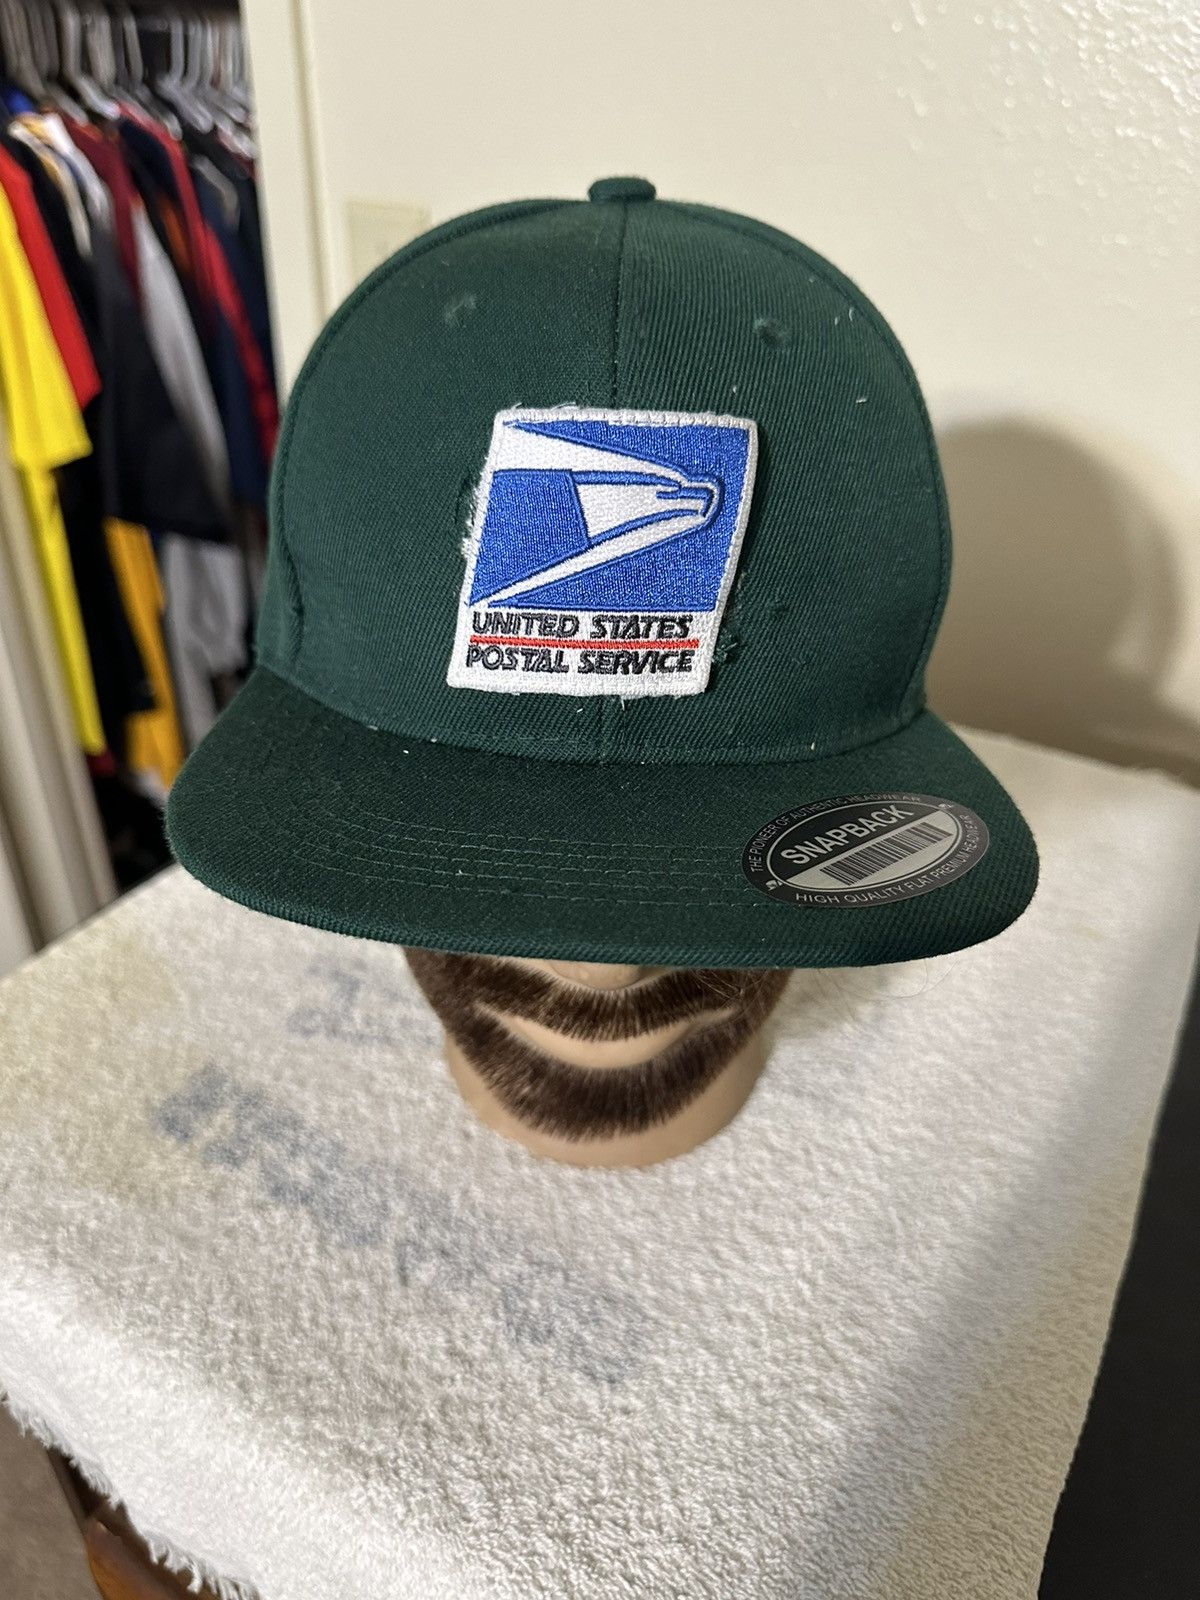 Anti social social club x usps hat for Sale in Downers Grove, IL - OfferUp